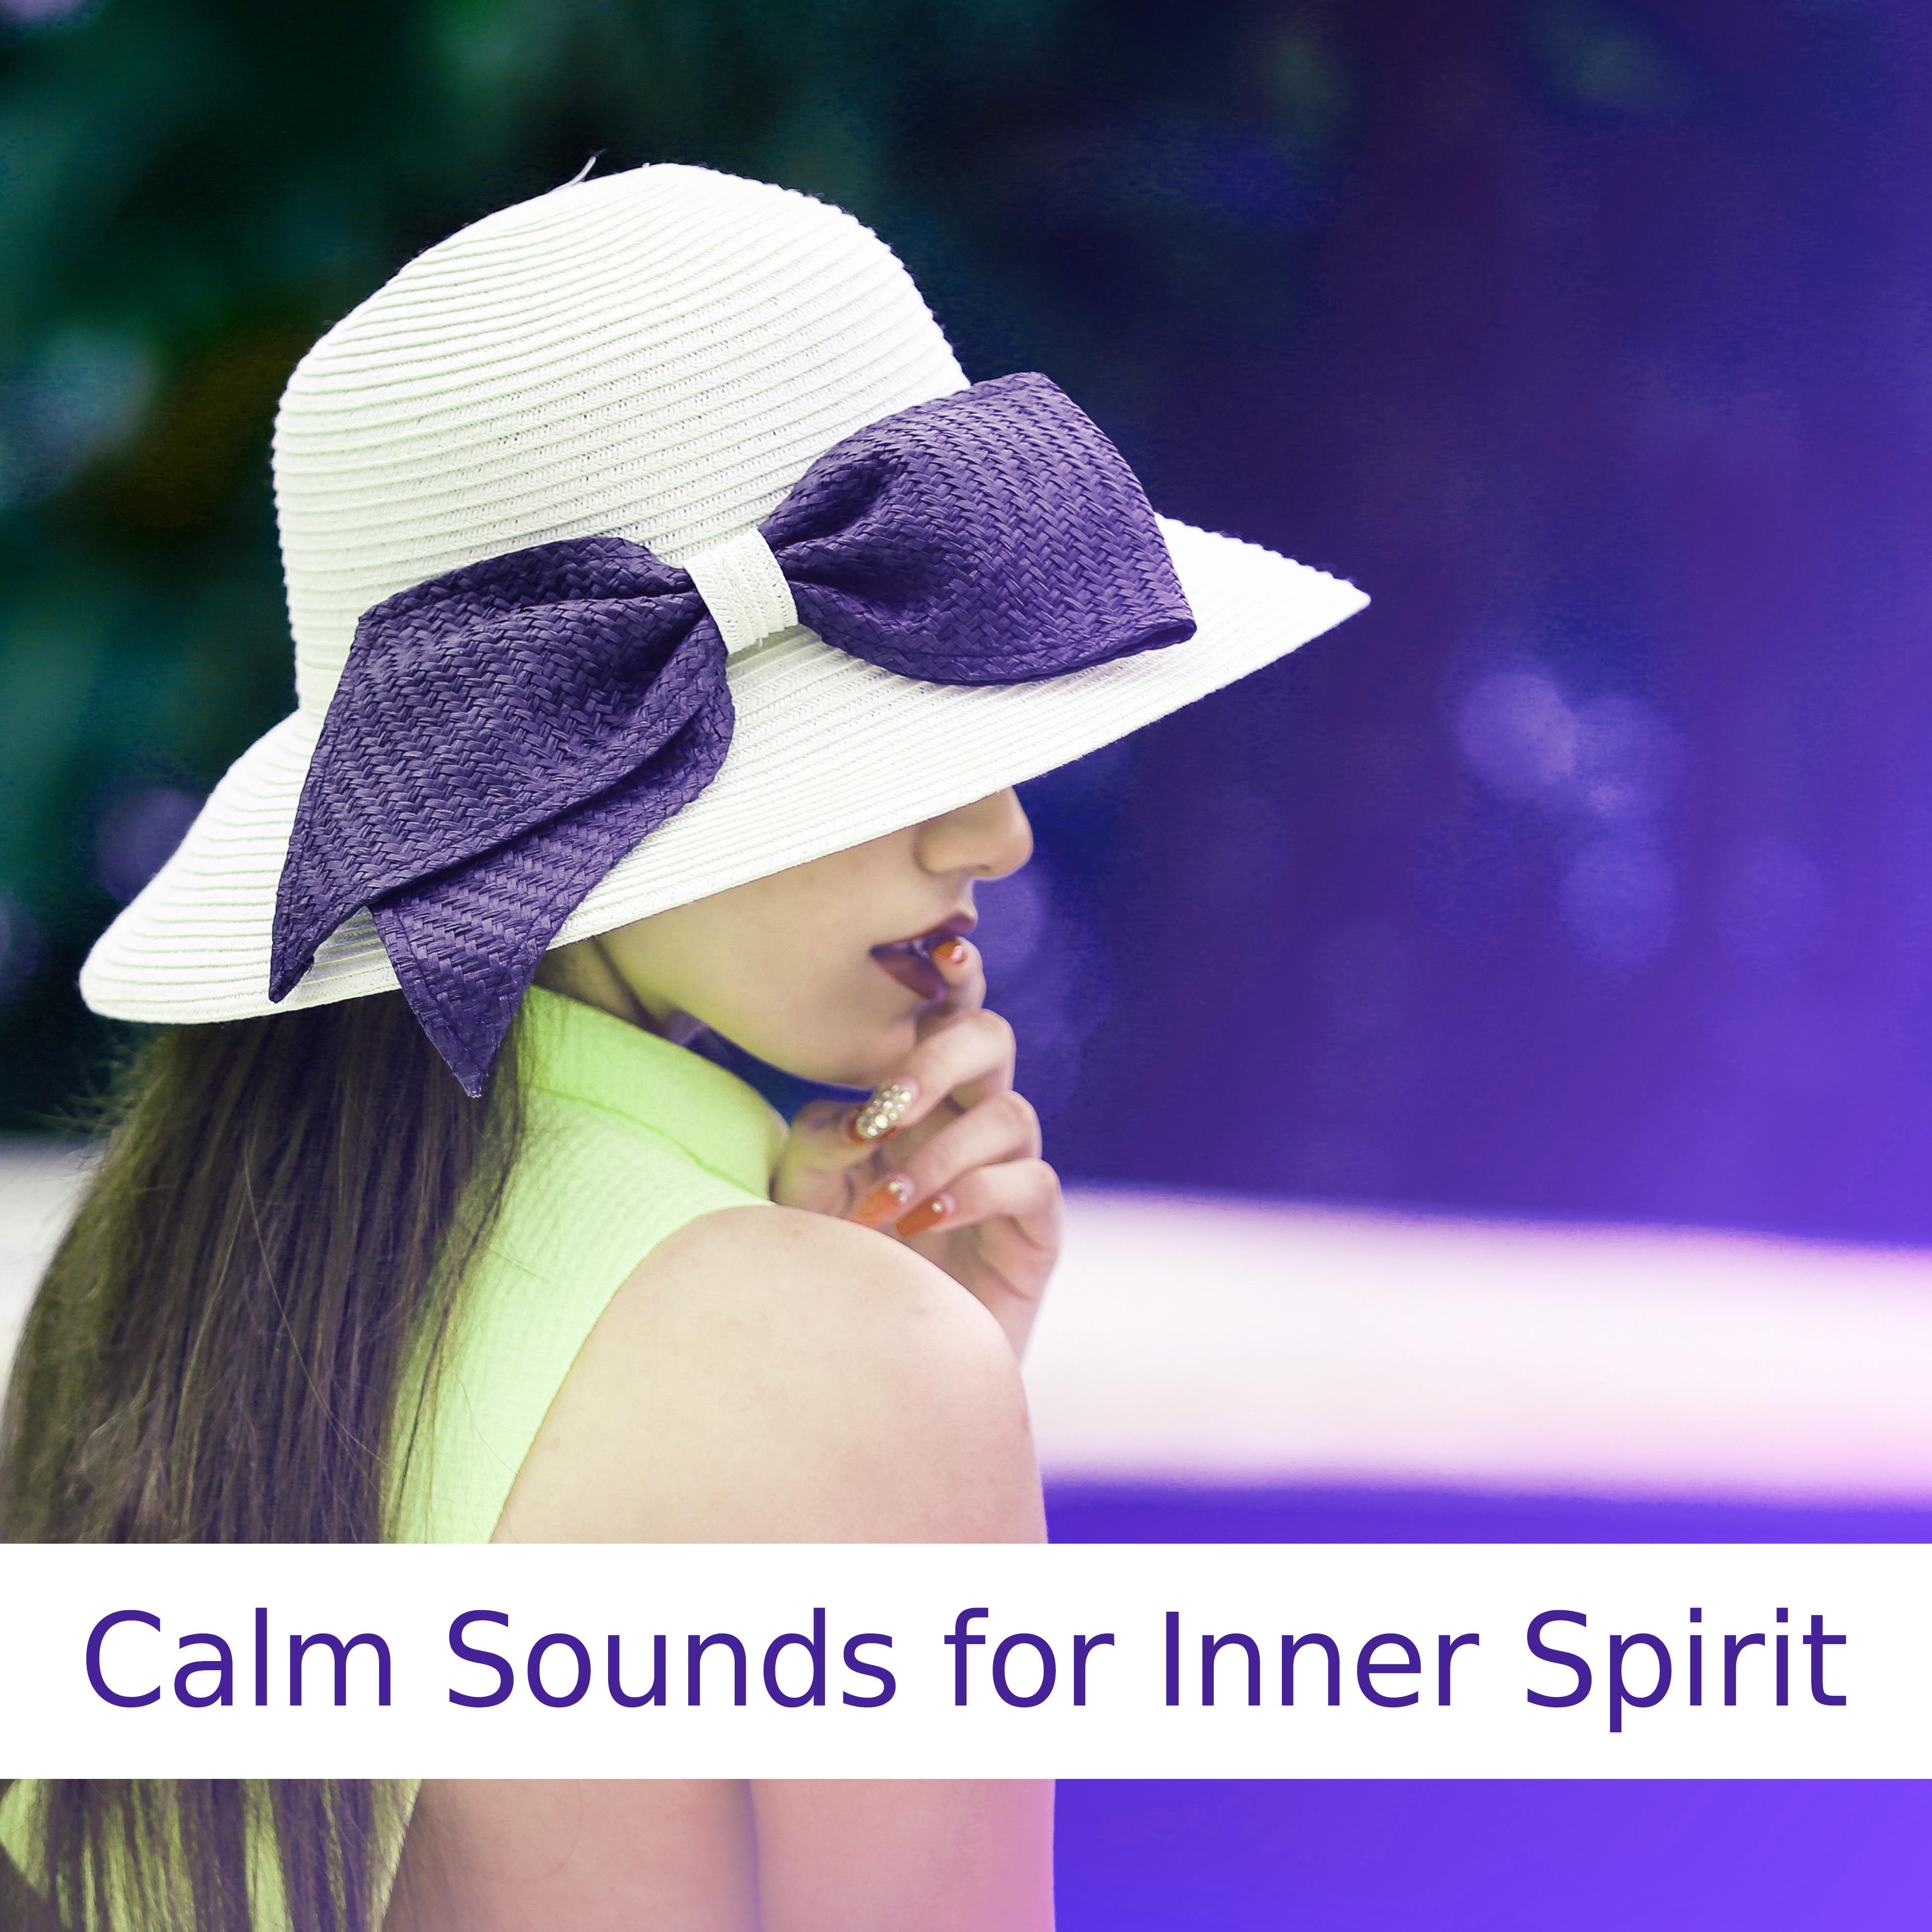 Calm Sounds for Inner Spirit  Chilled Sounds, Easy Listening, Piano Relaxation, New Age Rest